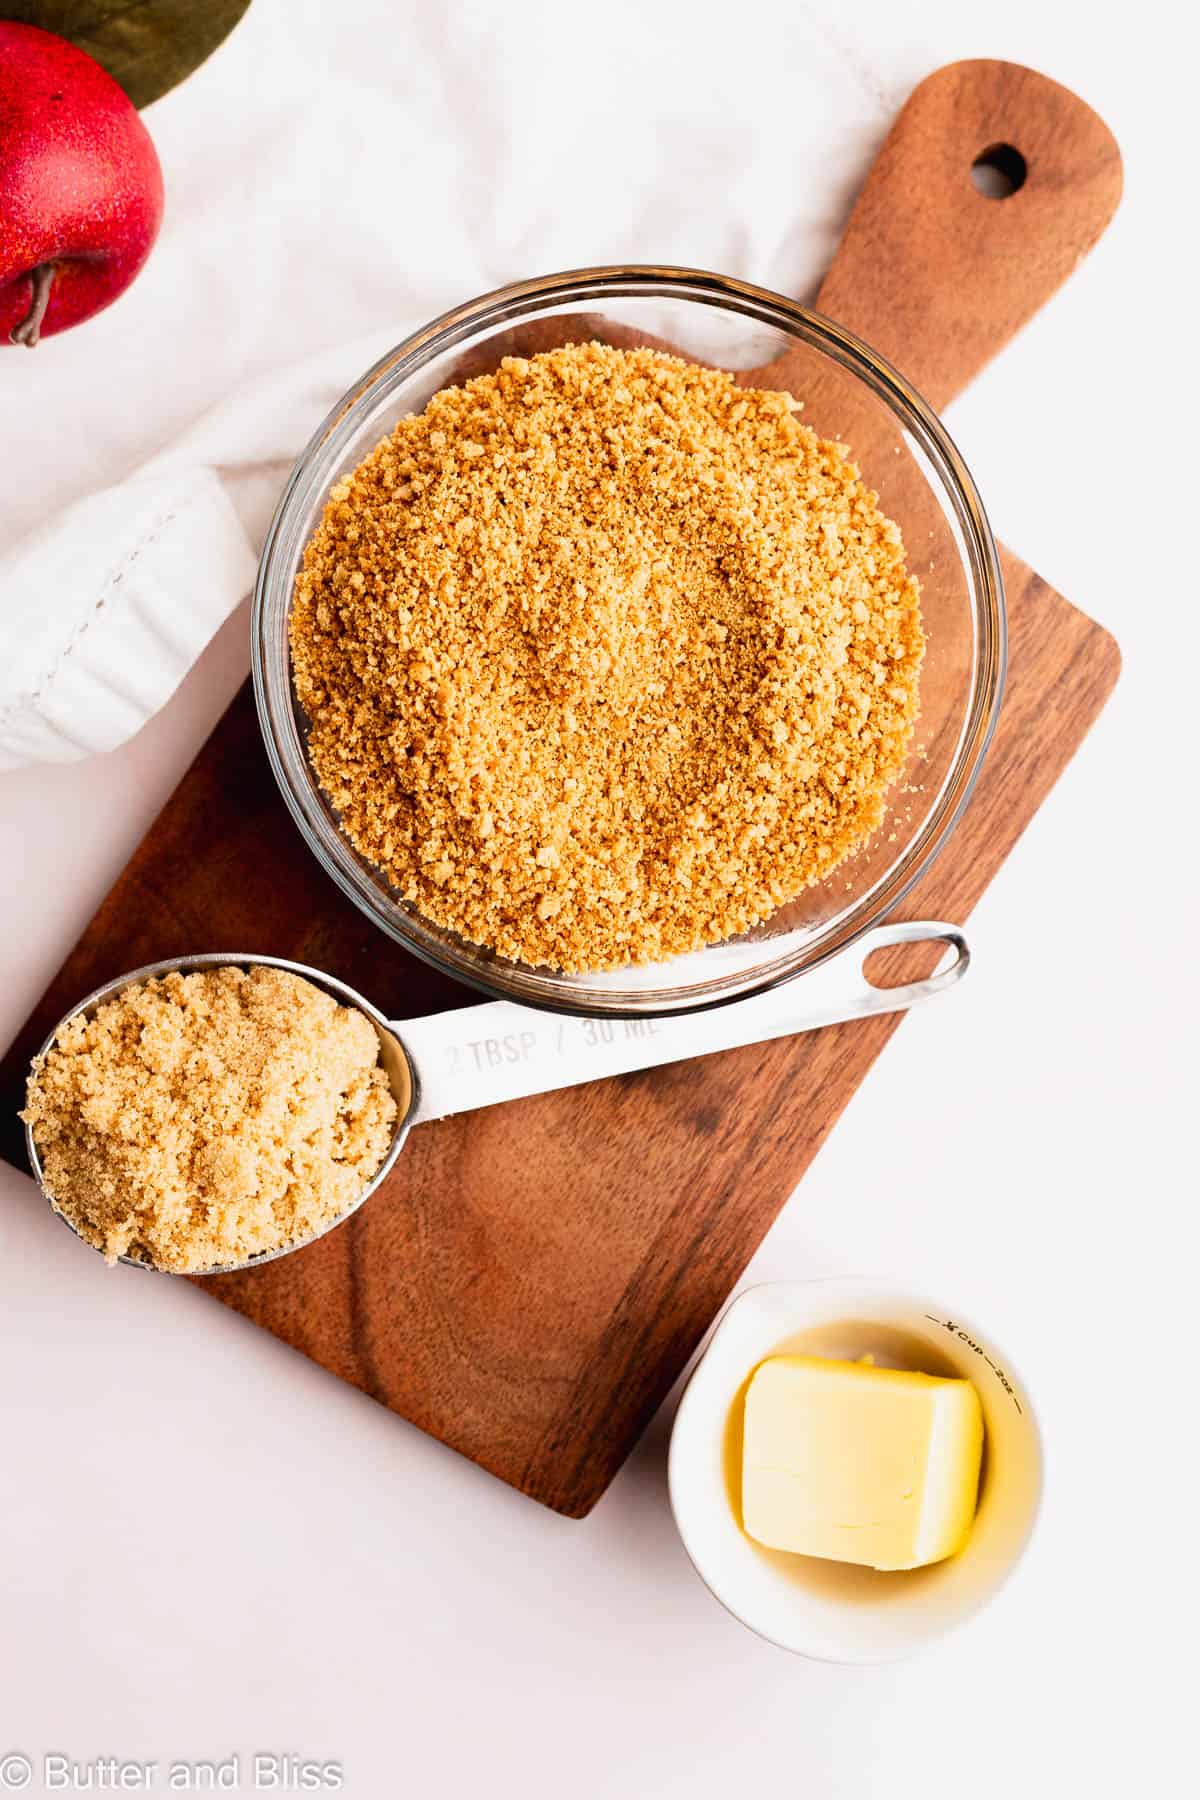 Graham cracker crumbs in a small bowl set on a wood trivet.